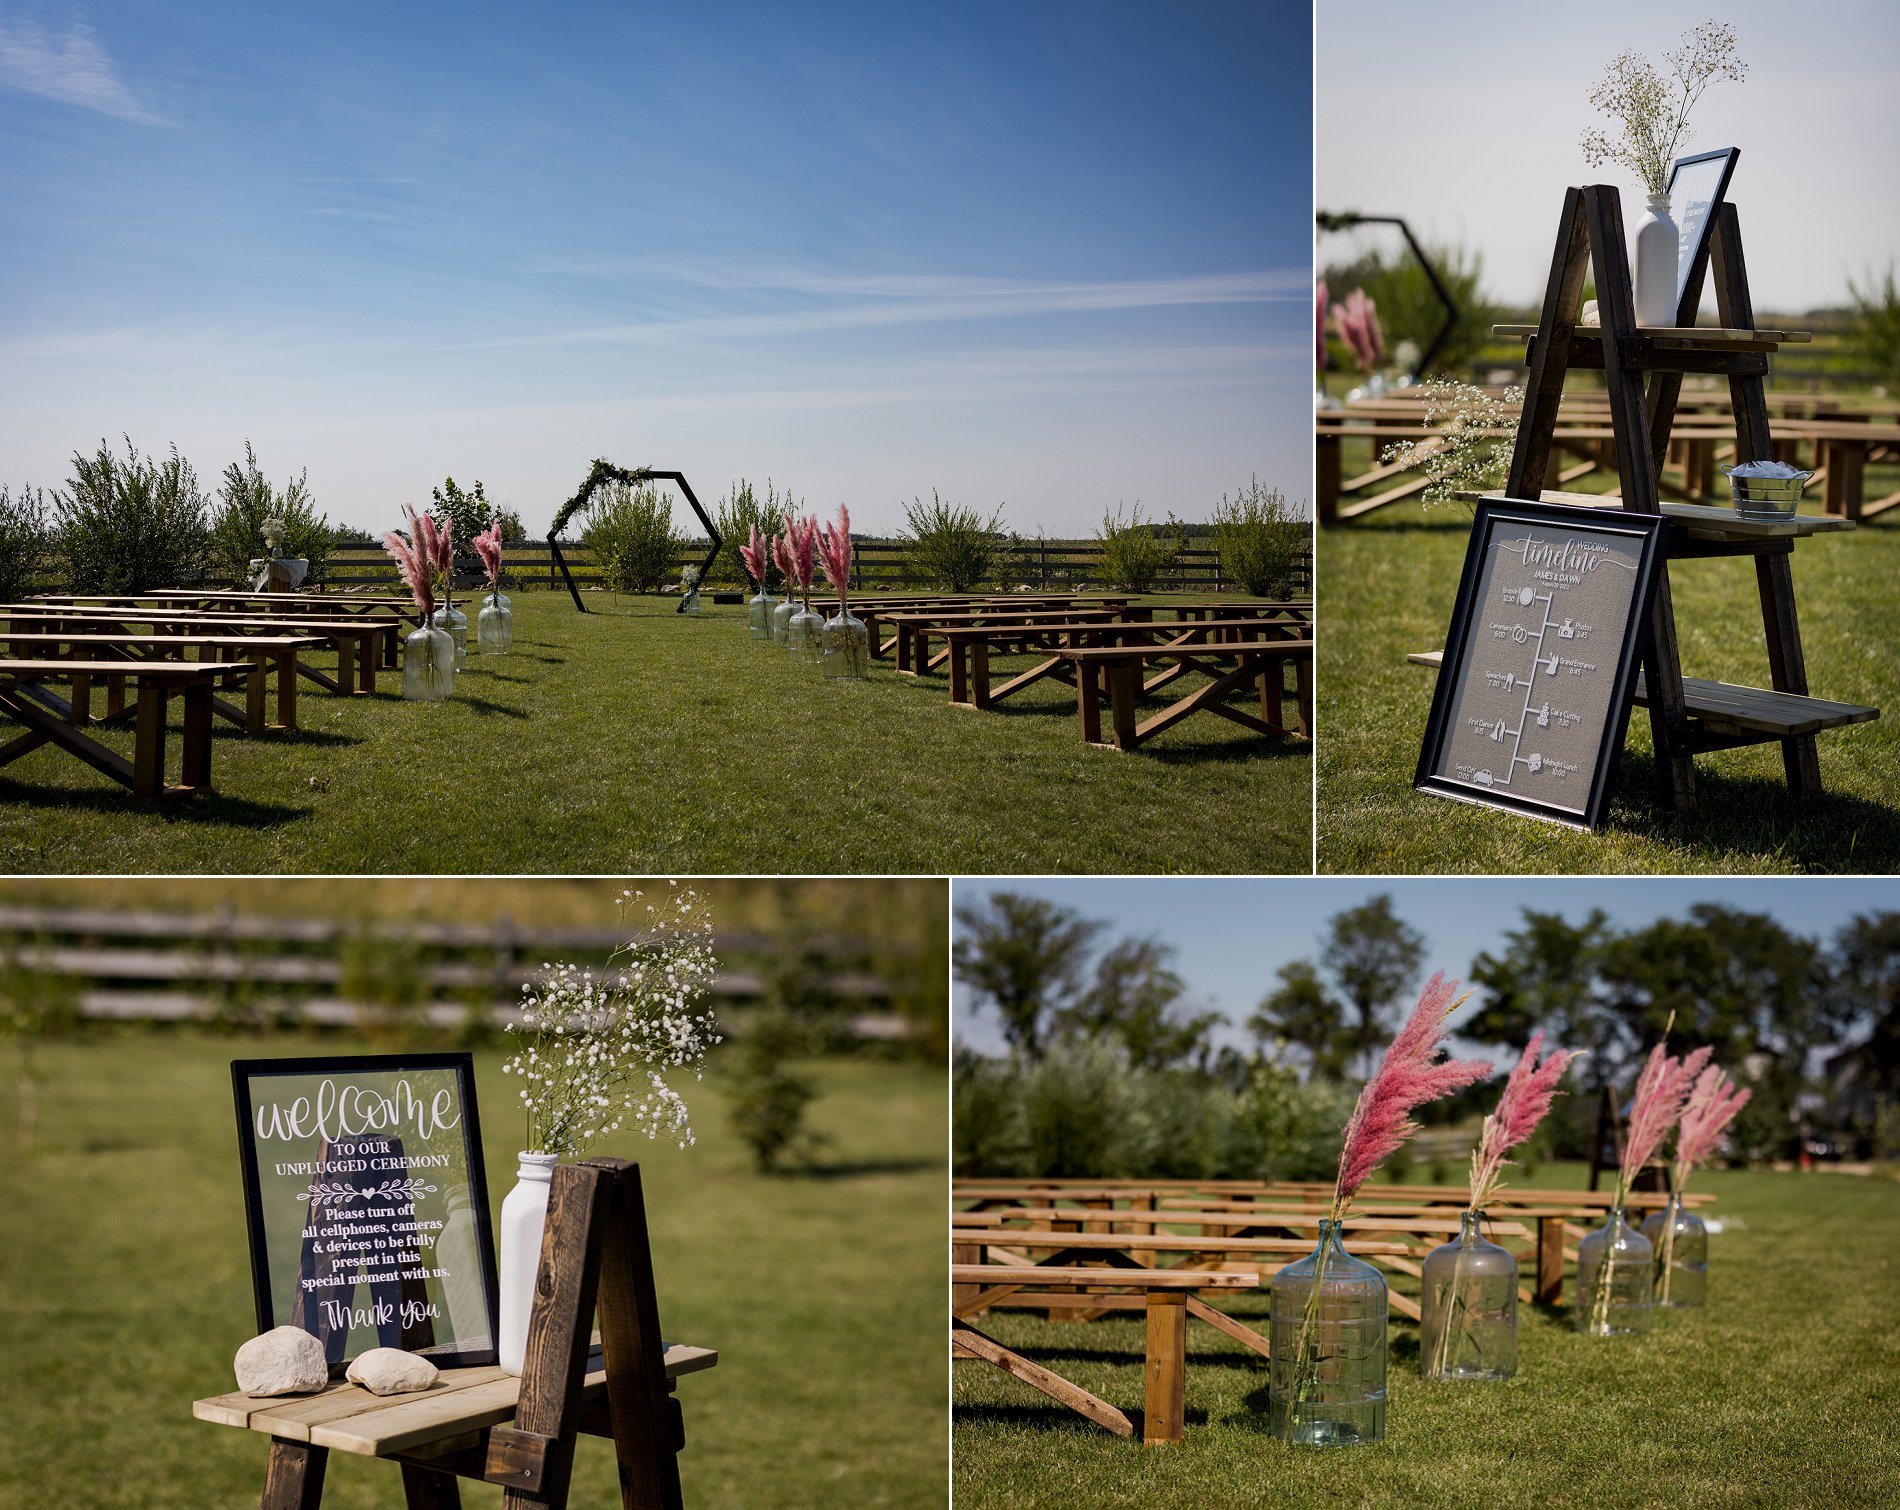 outdoor wedding ceremony location at guenther farms near saskatoon and some ideas for rustic modern decor